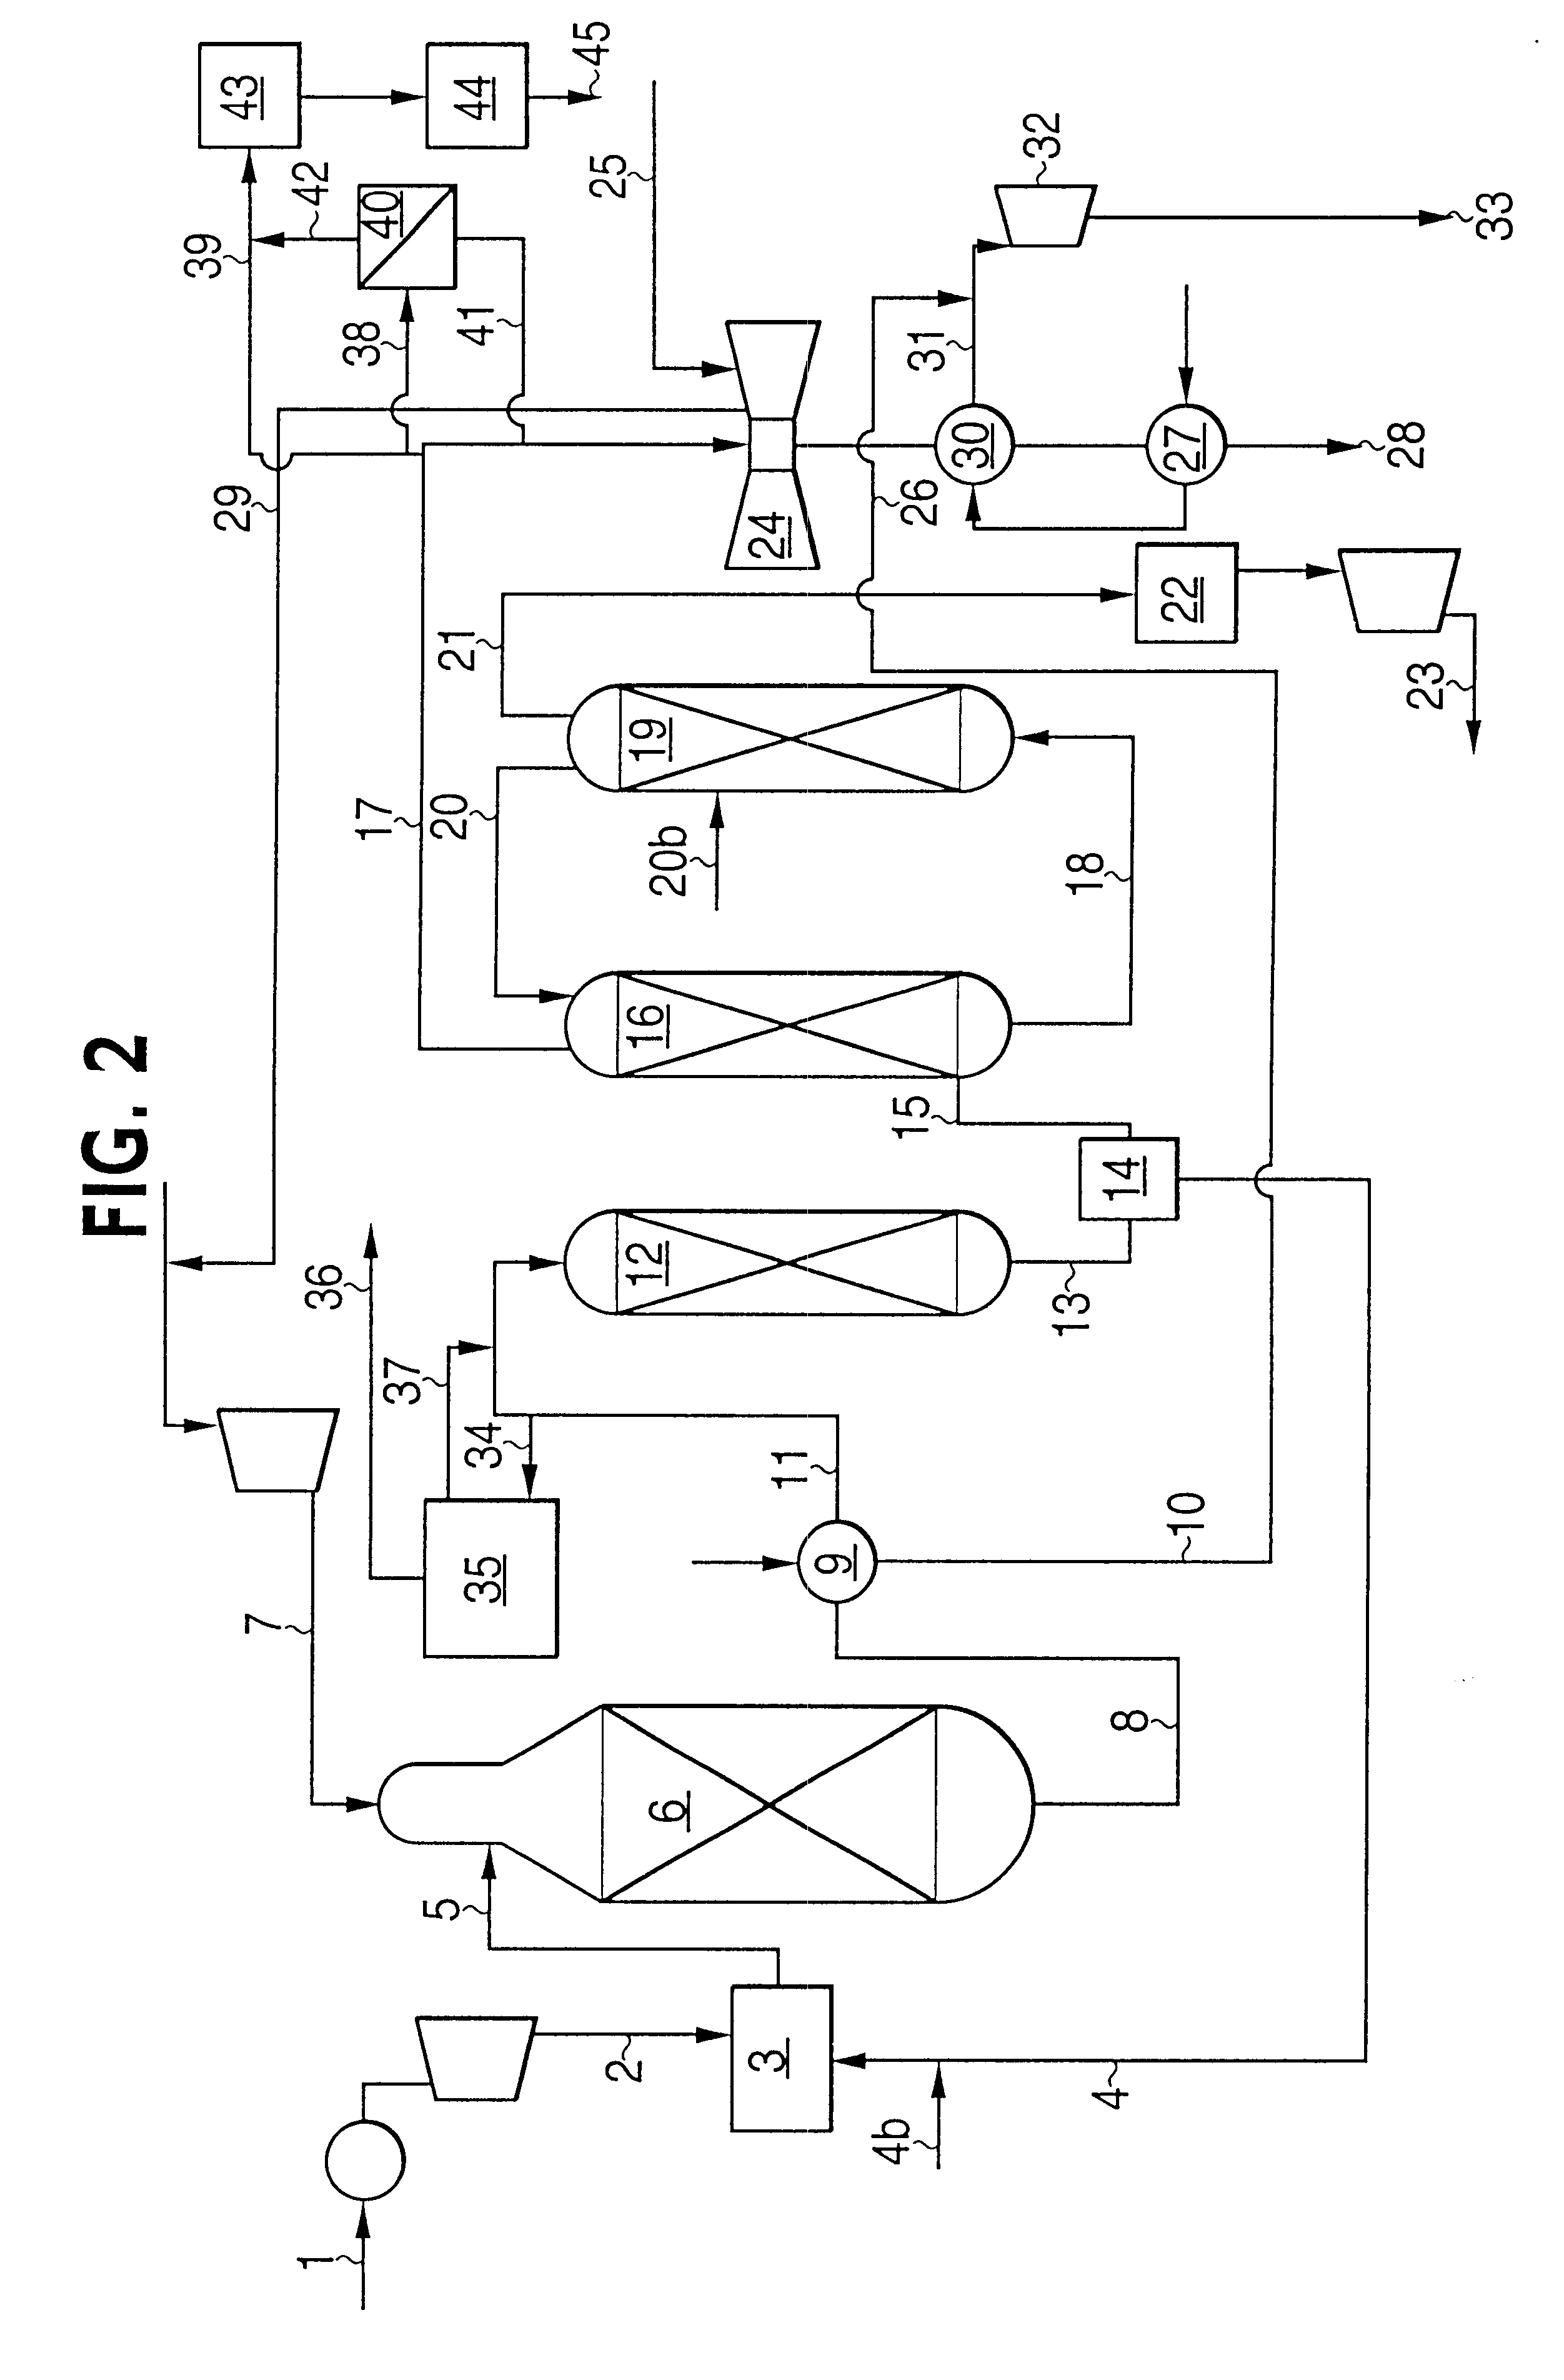 Process for generating electric energy, steam and carbon dioxide from hydrocarbon feedstock